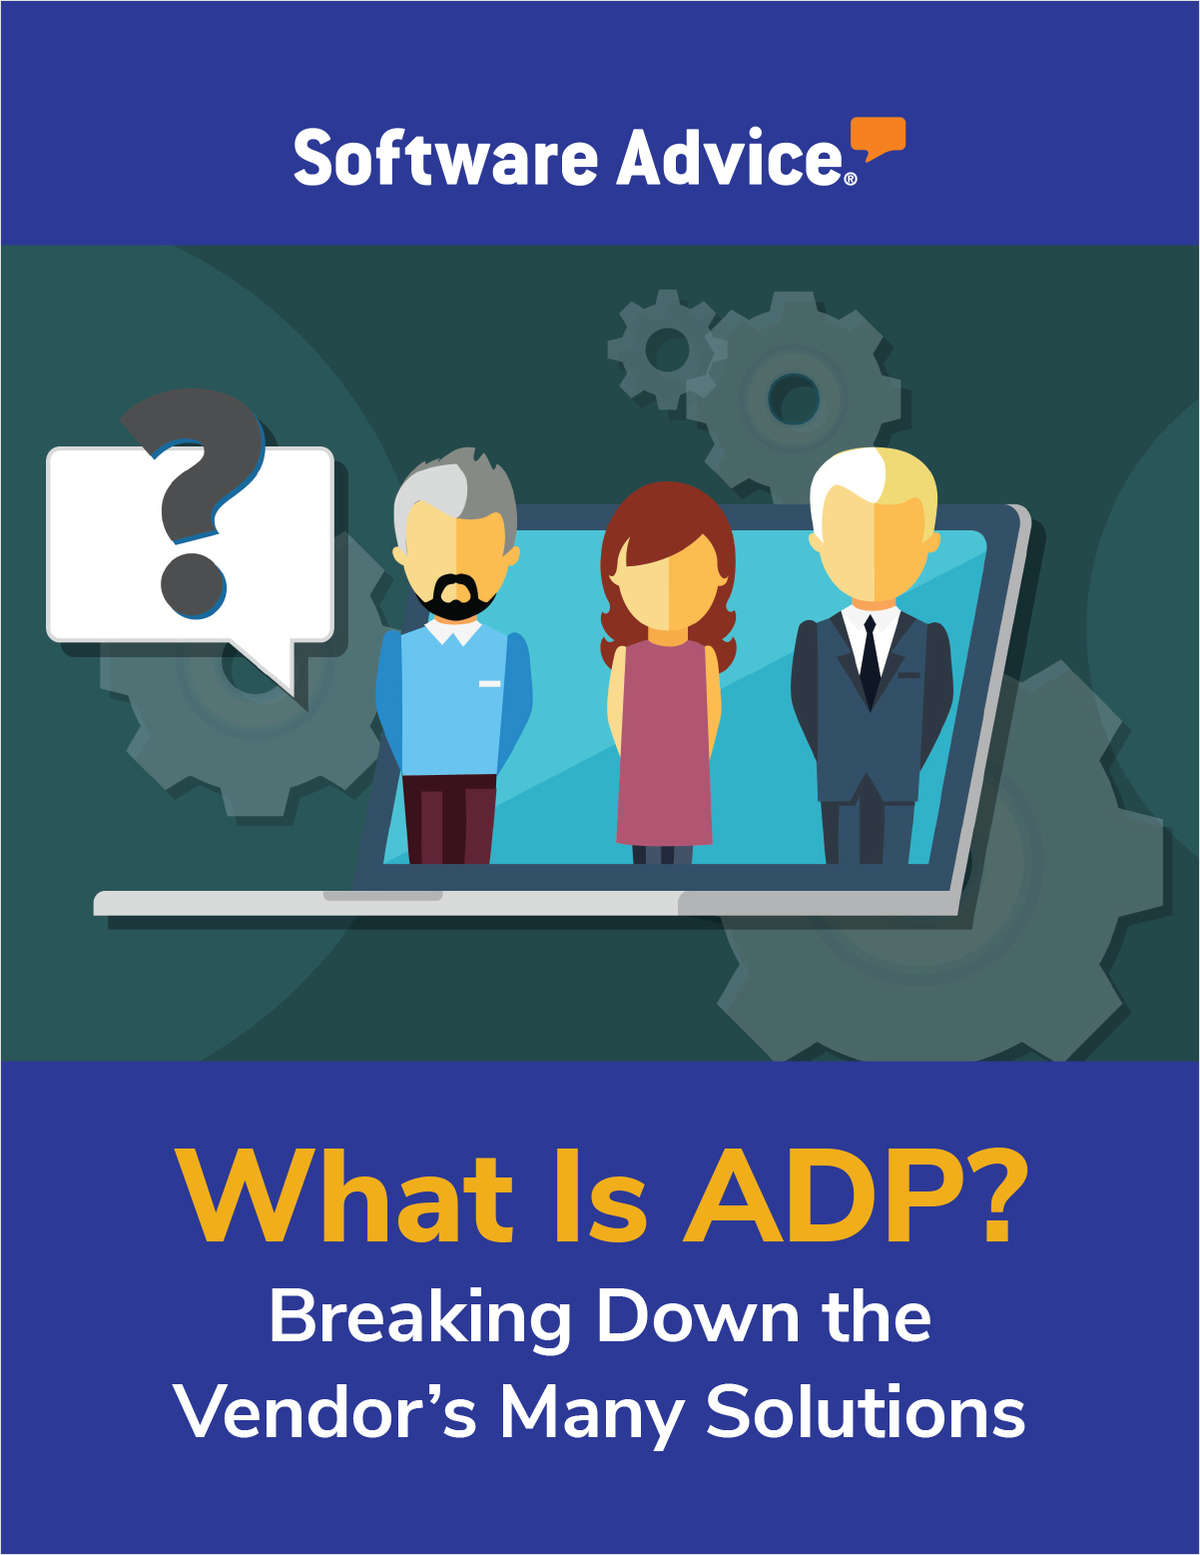 What Is ADP? Breaking Down the Vendor's Many Solutions